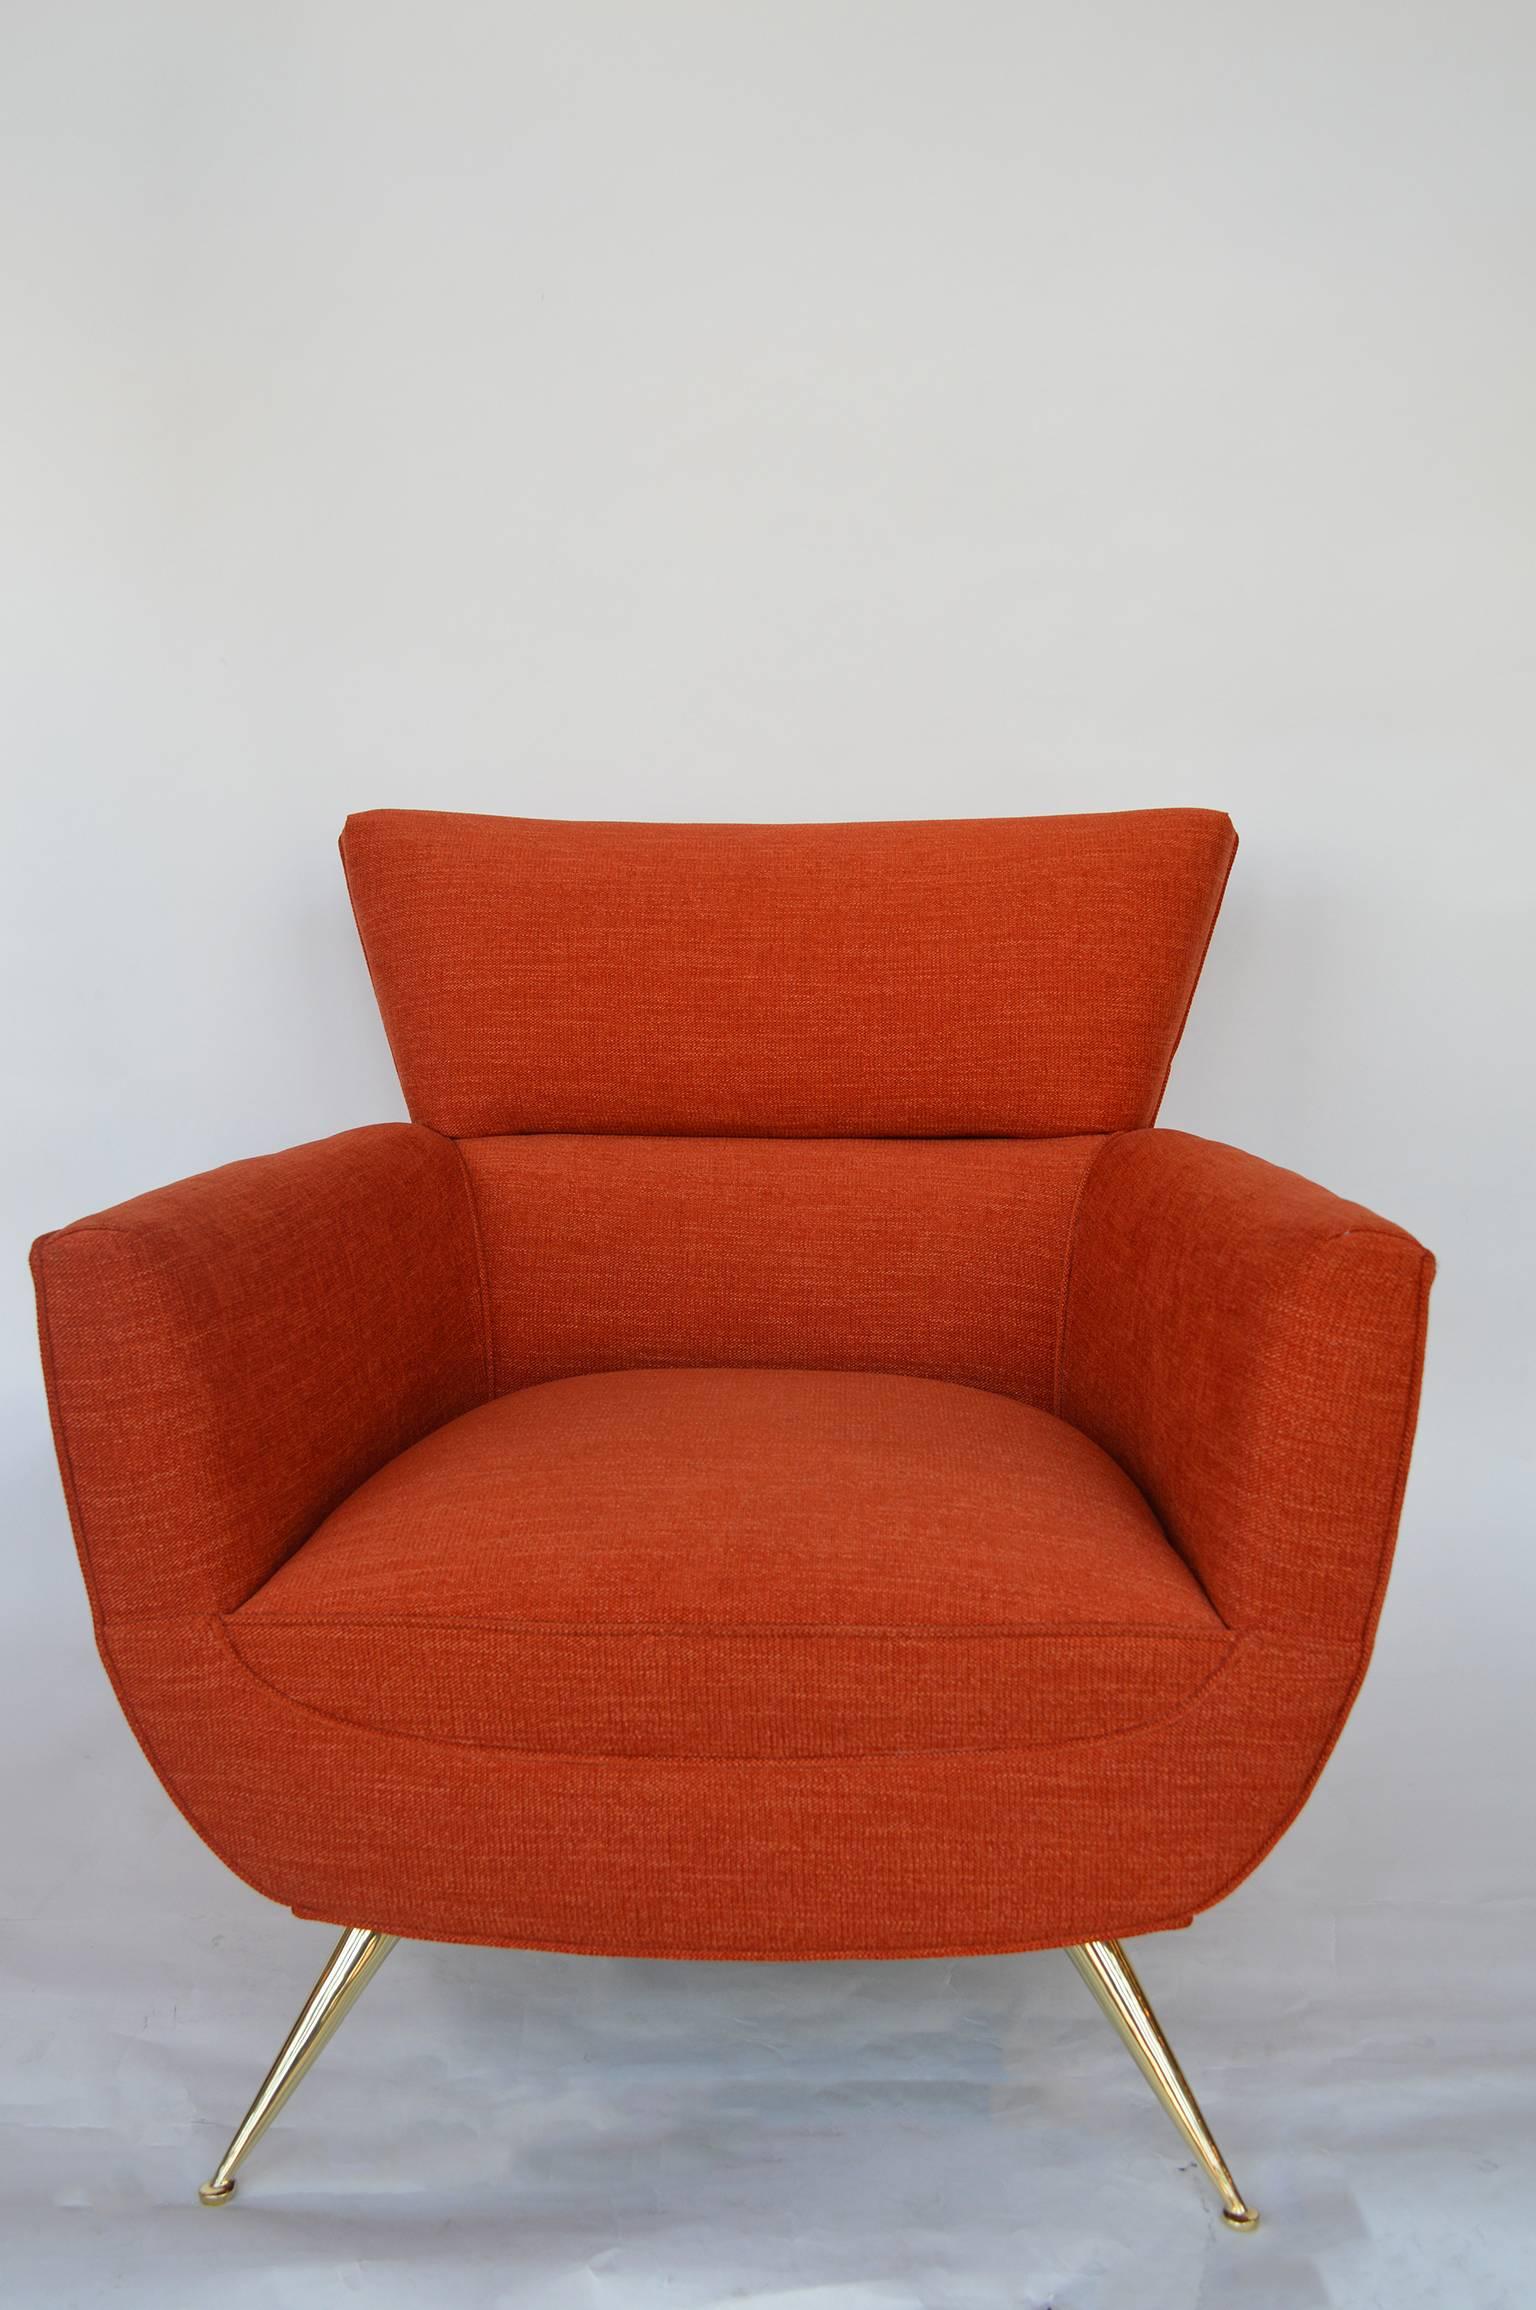 Pair of Tommi Parzinger armchairs. Polished brass feet. Newly upholstered in a vibrant orange fabric.